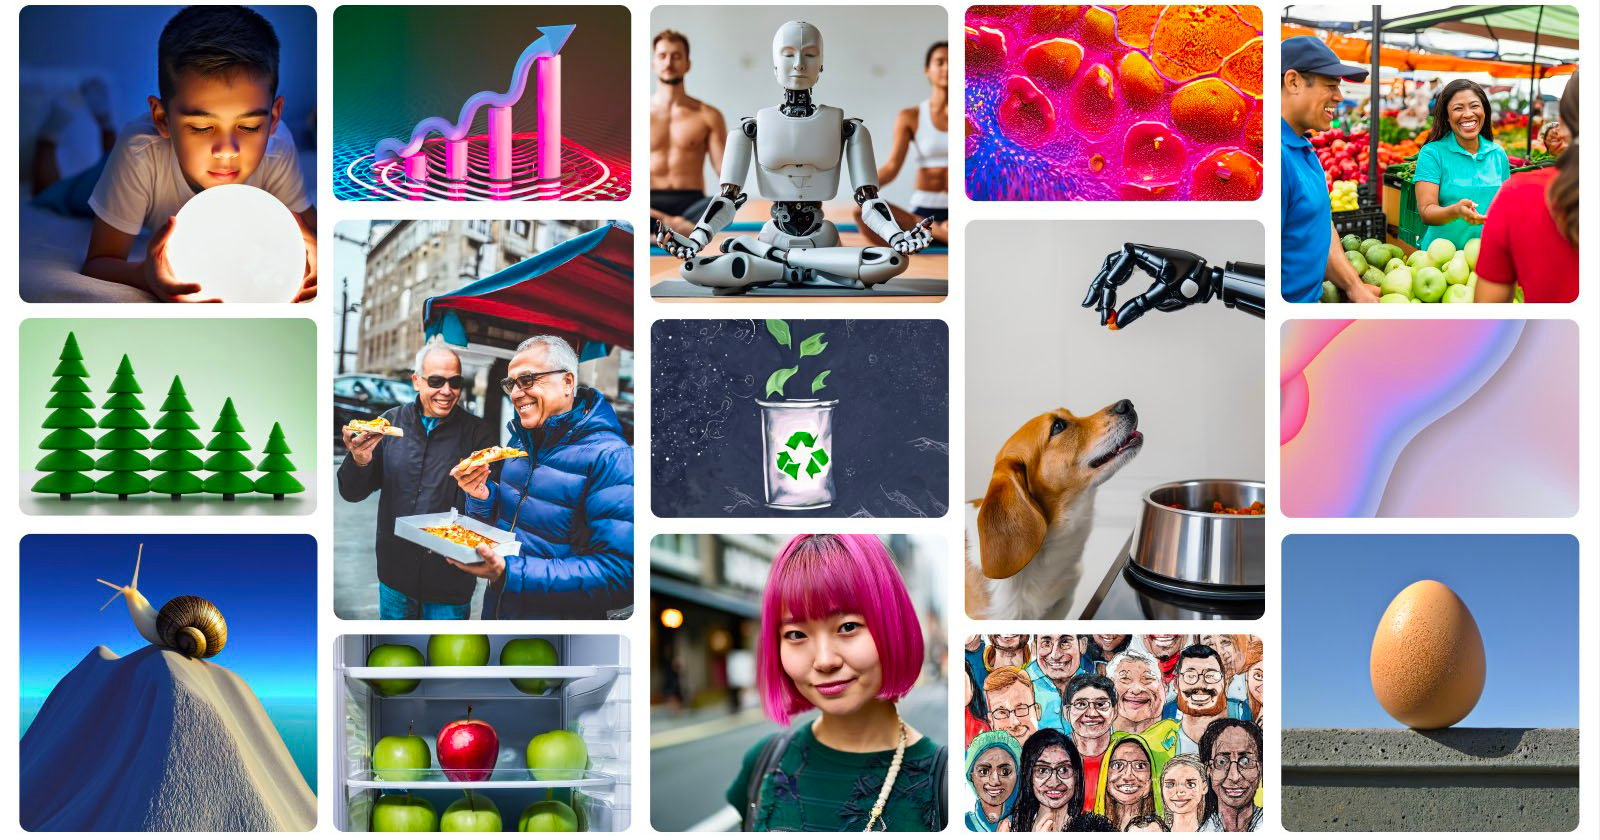 Getty Images Launches AI Image Generator for Stock Photos